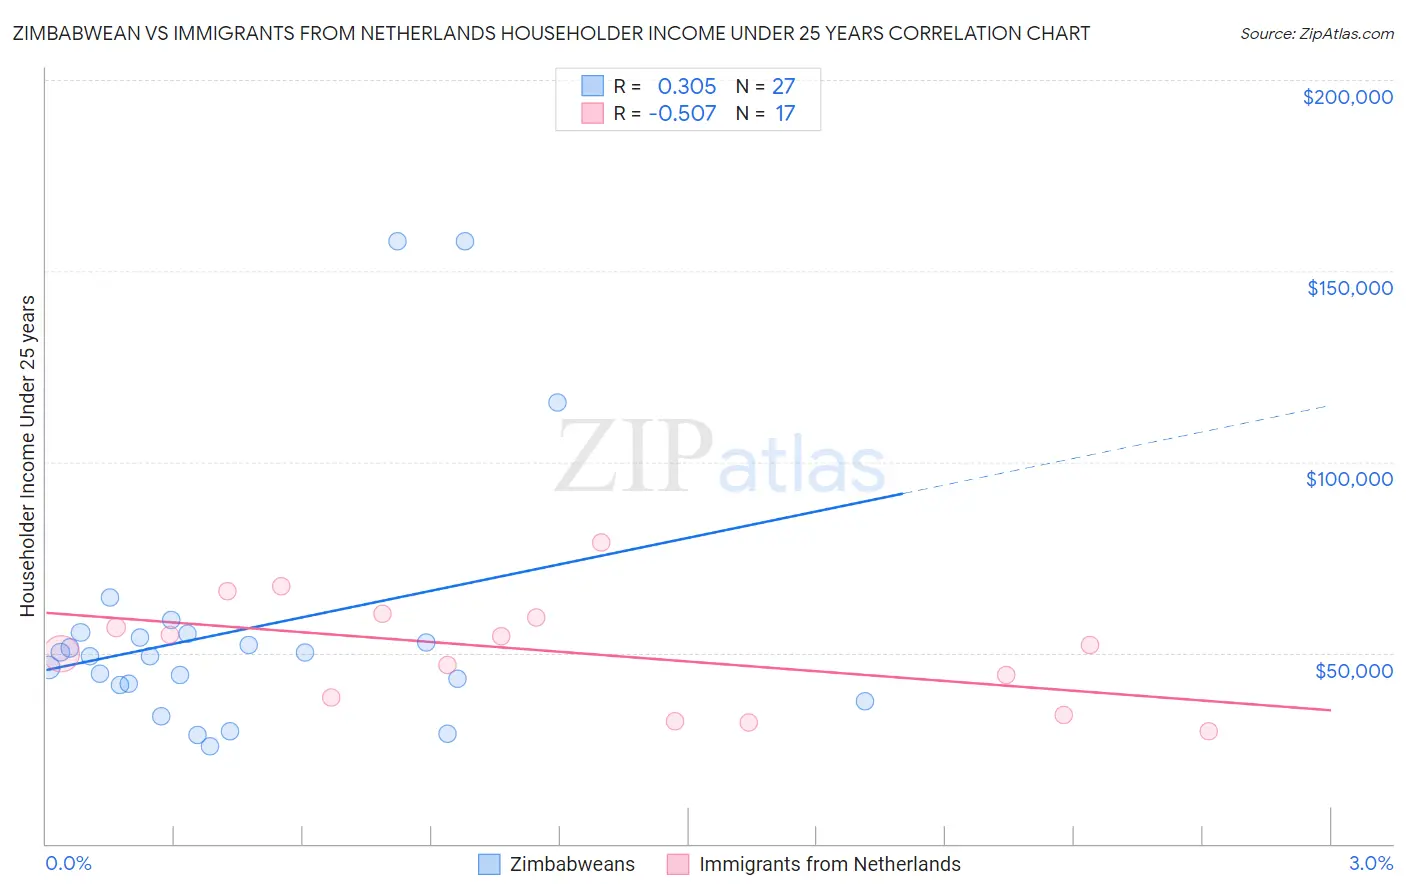 Zimbabwean vs Immigrants from Netherlands Householder Income Under 25 years